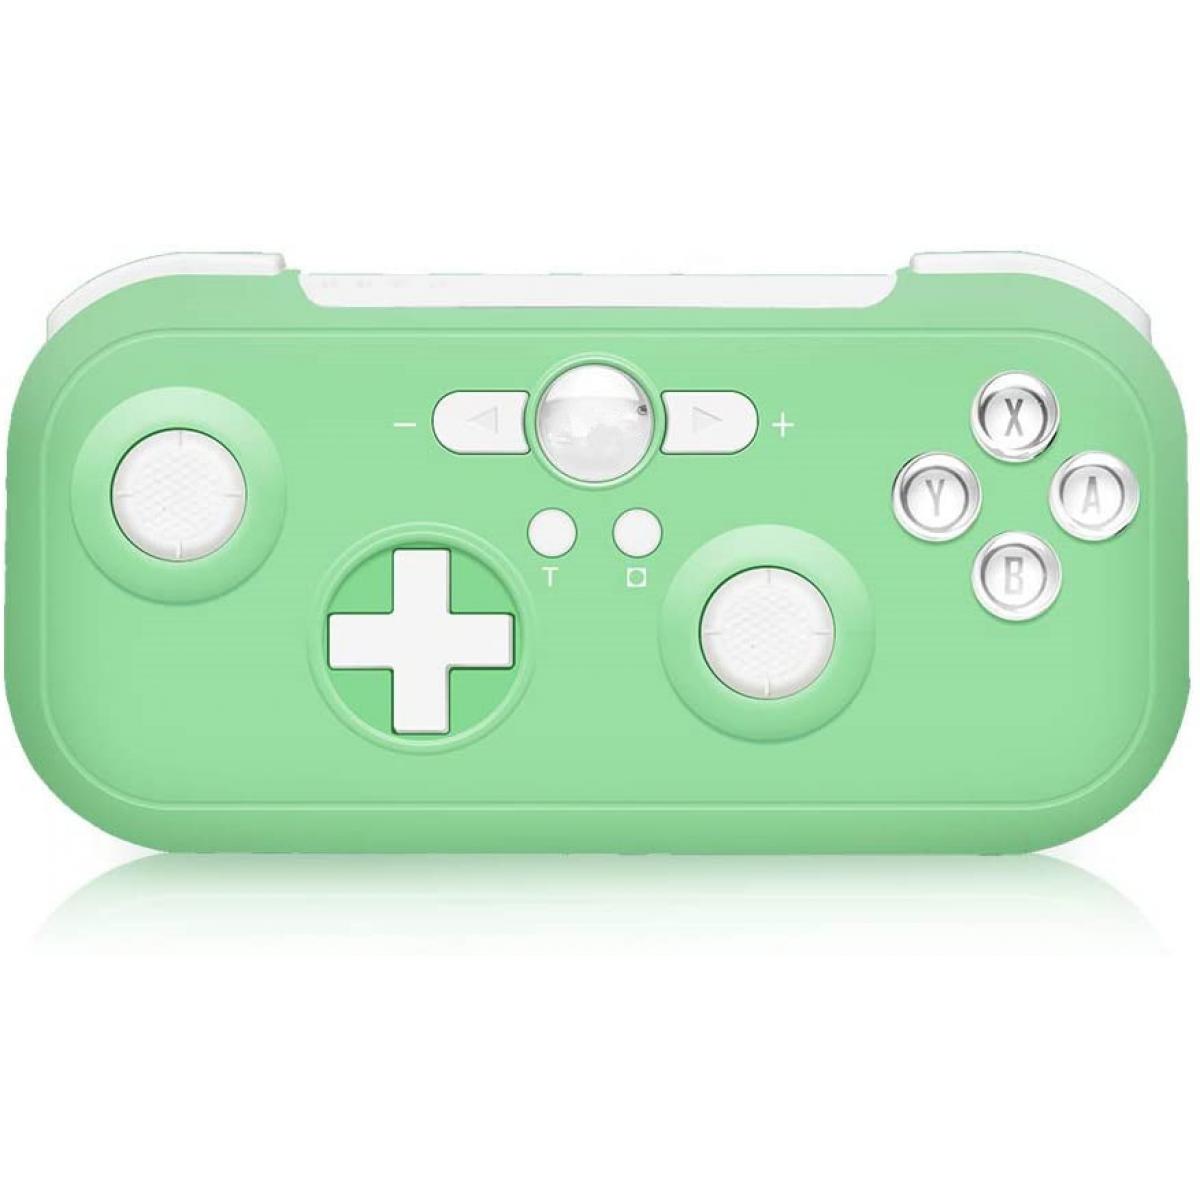 Manette retrogaming Chrono Manette Switch 6-Axis Sensor Double Shock Wireless Bluetooth Pro Manette Switch sans Fil pour Nintendo Switch Compatible avec Switch, Switch Lite, PS3, Steam（Vert）